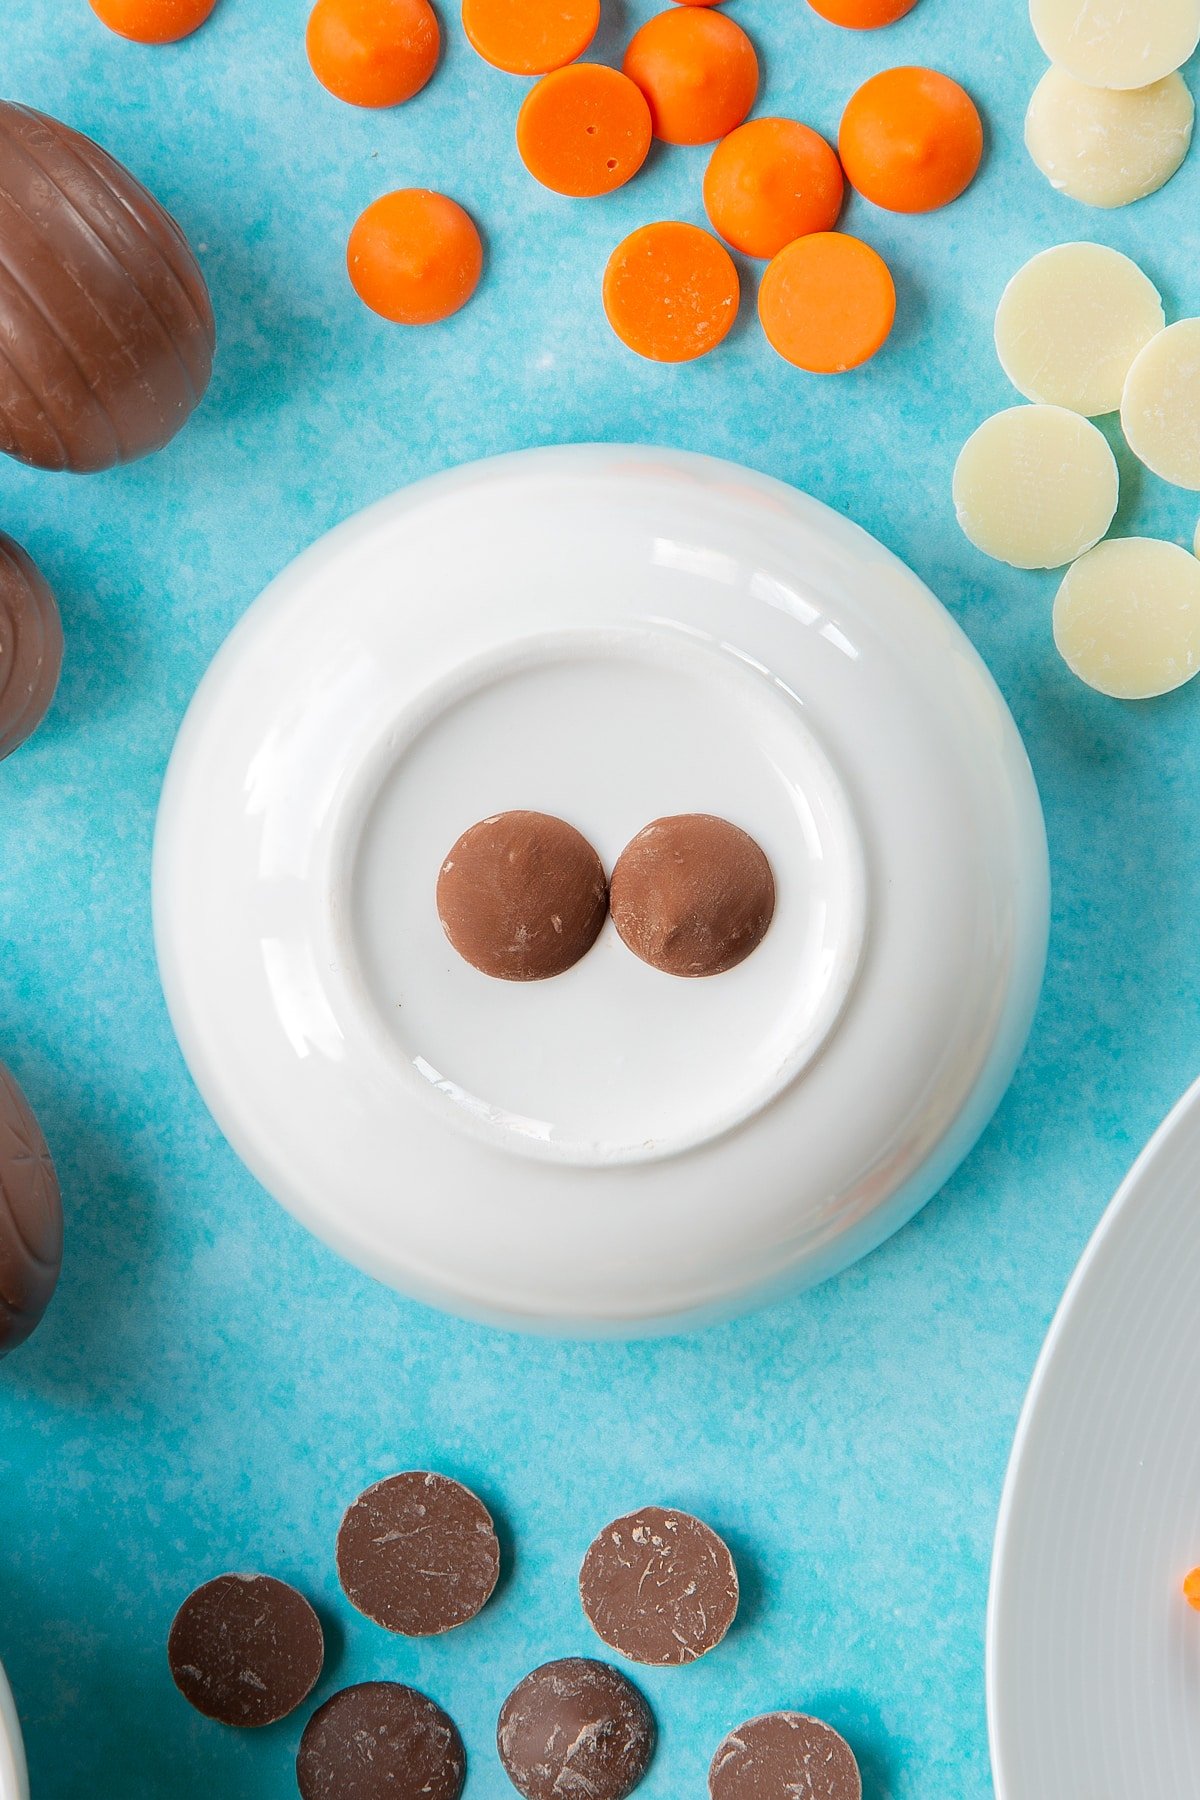 Two chocolate buttons sit on an upturned white bowl, surrounded by ingredients to make chocolate chicks.